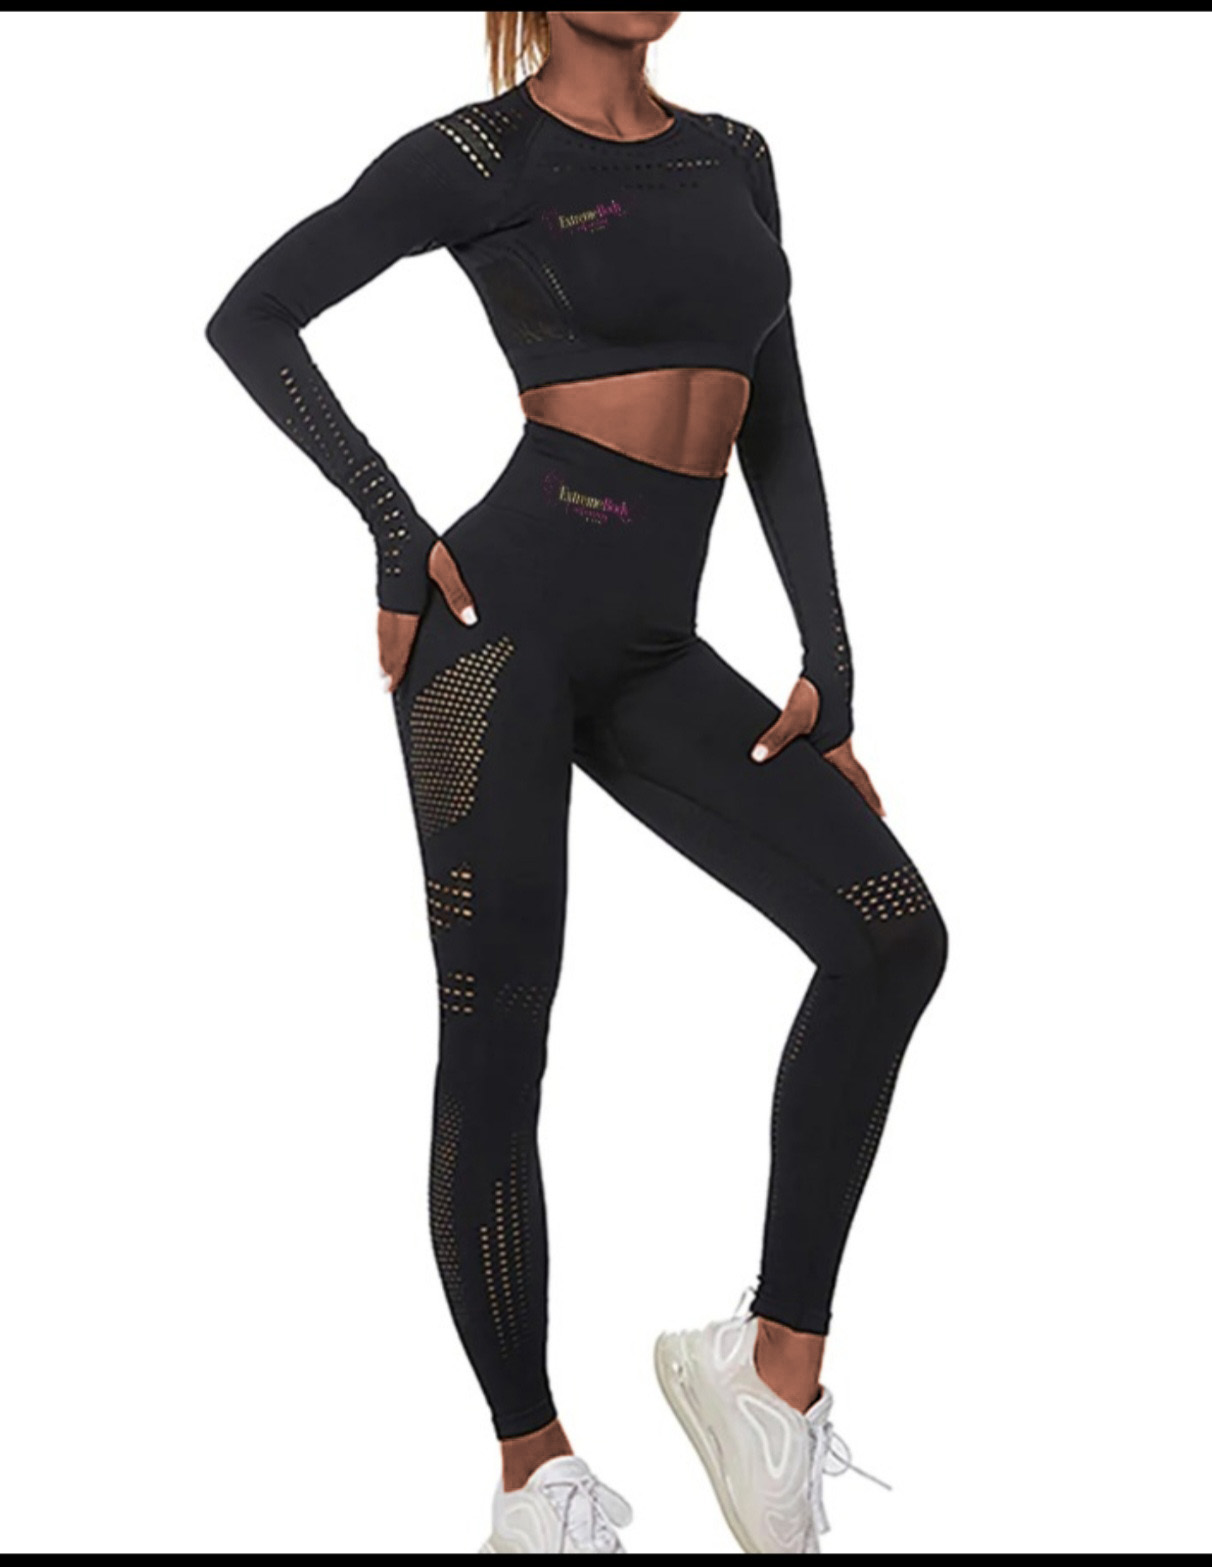 Yoga Suit - Extreme Body Contouring & Spa